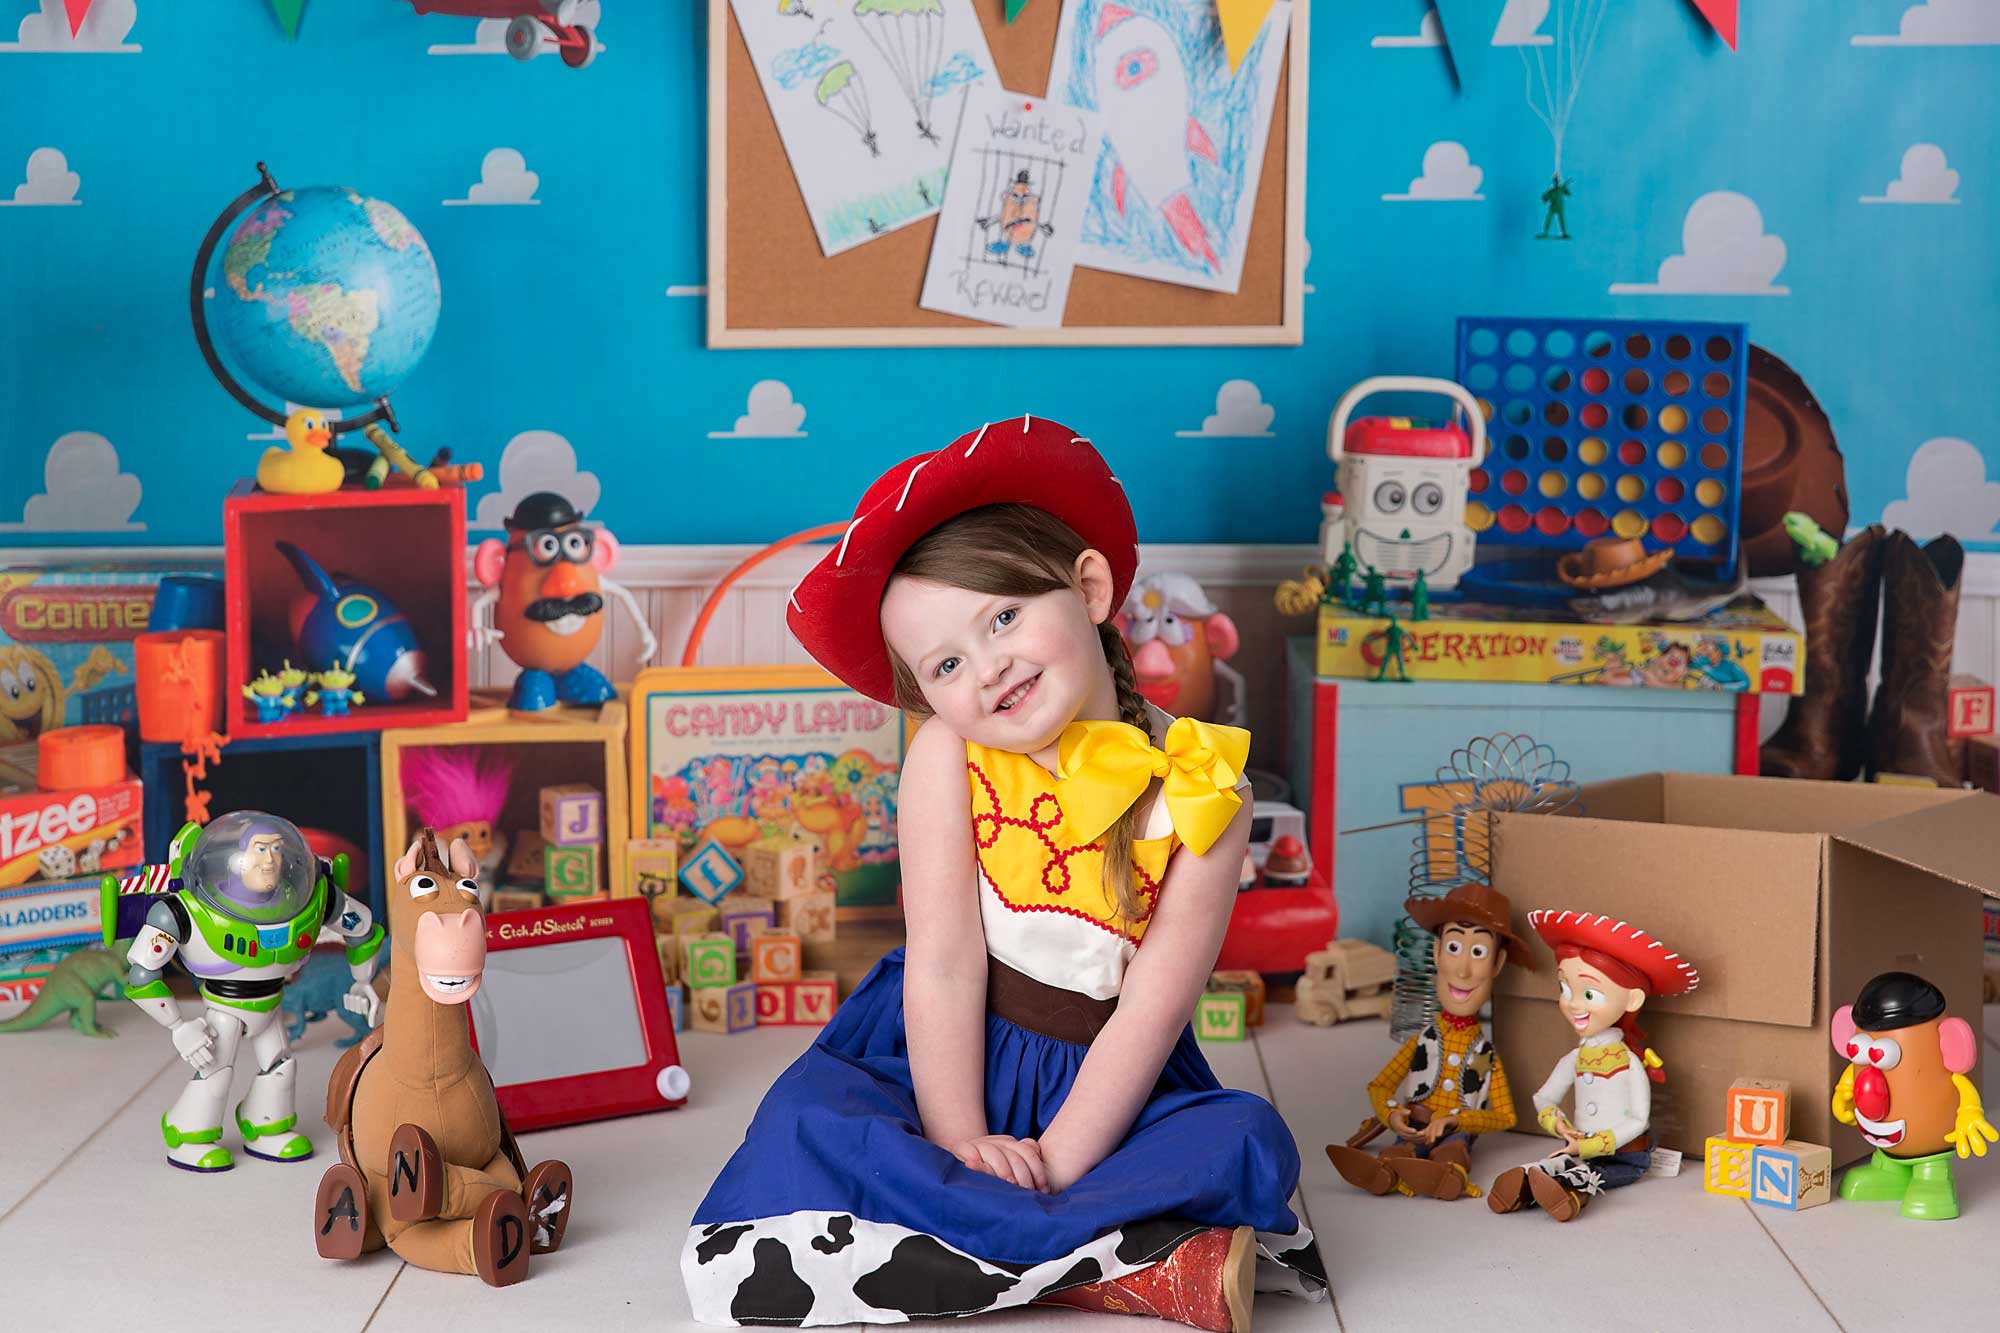 Toy Story themed children's portrait session of 5 year old little girl.